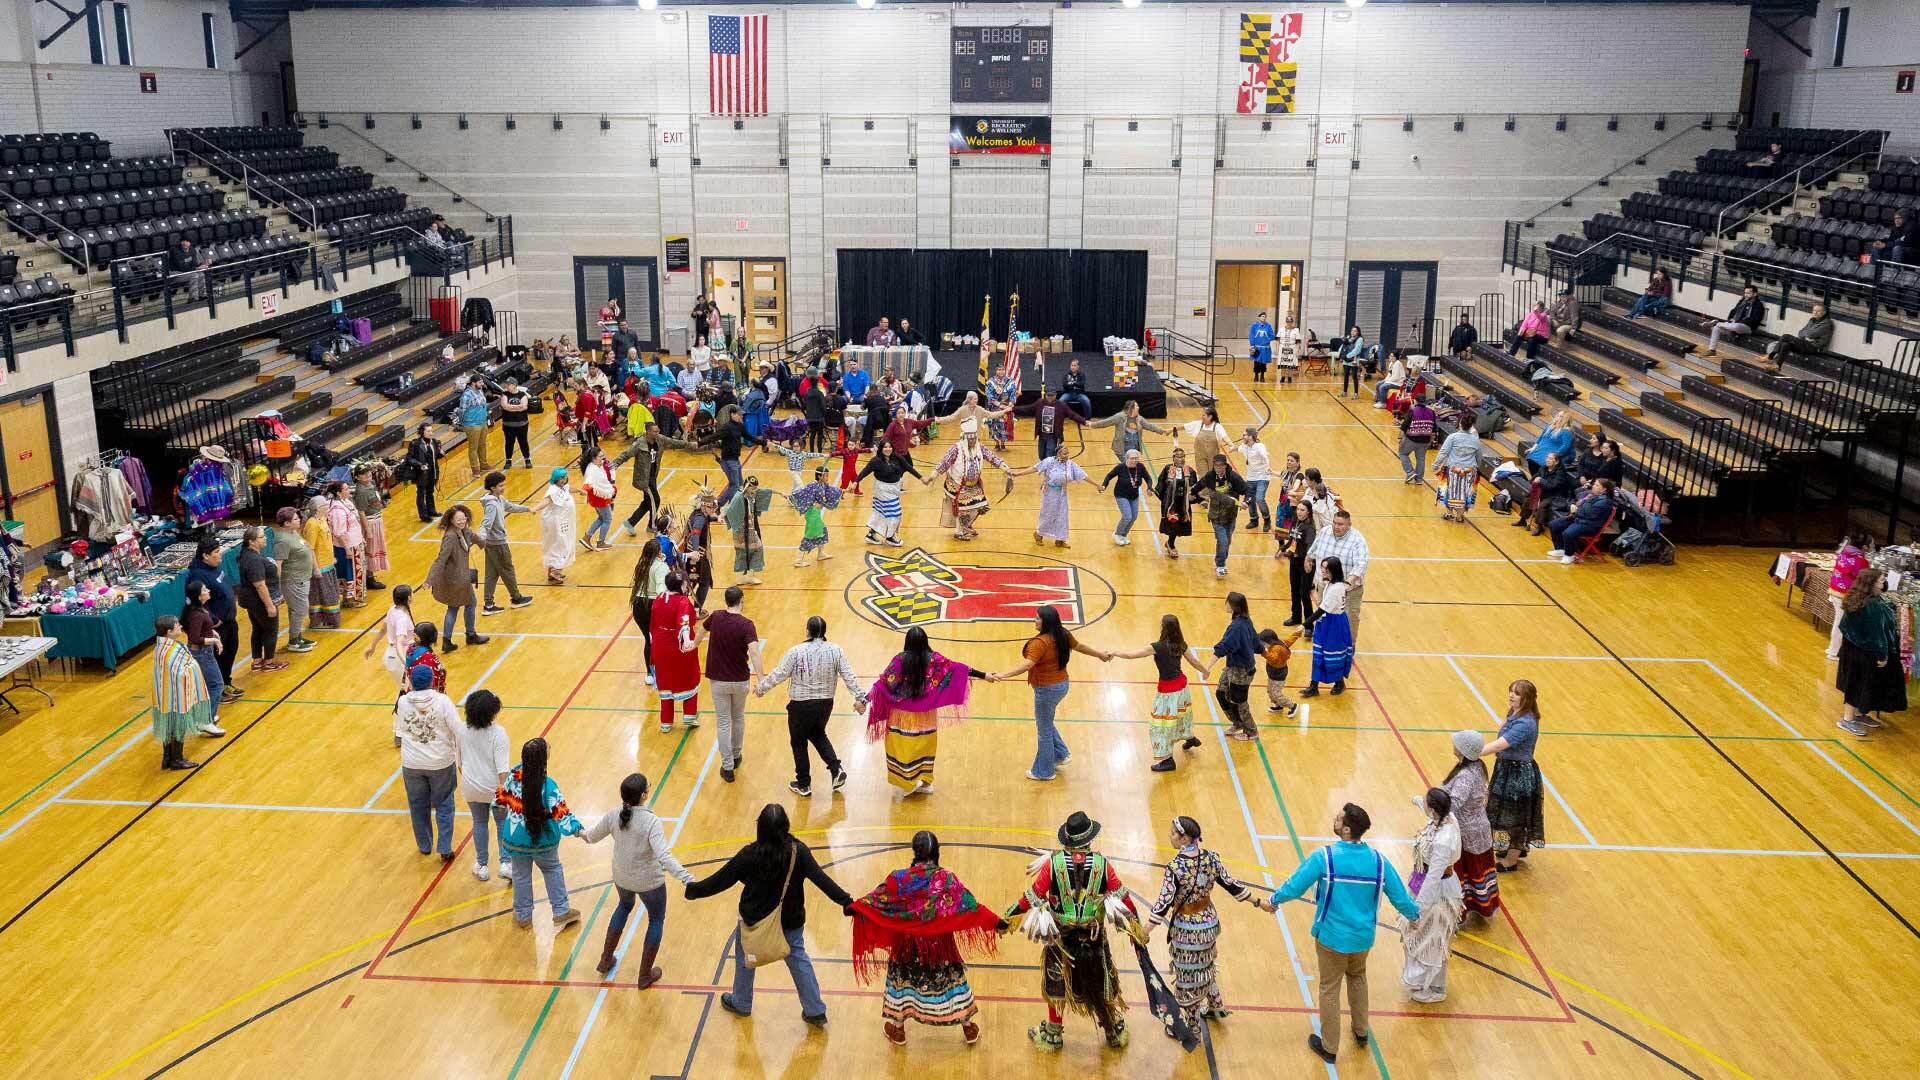 Pow wow attendees do  a round dance